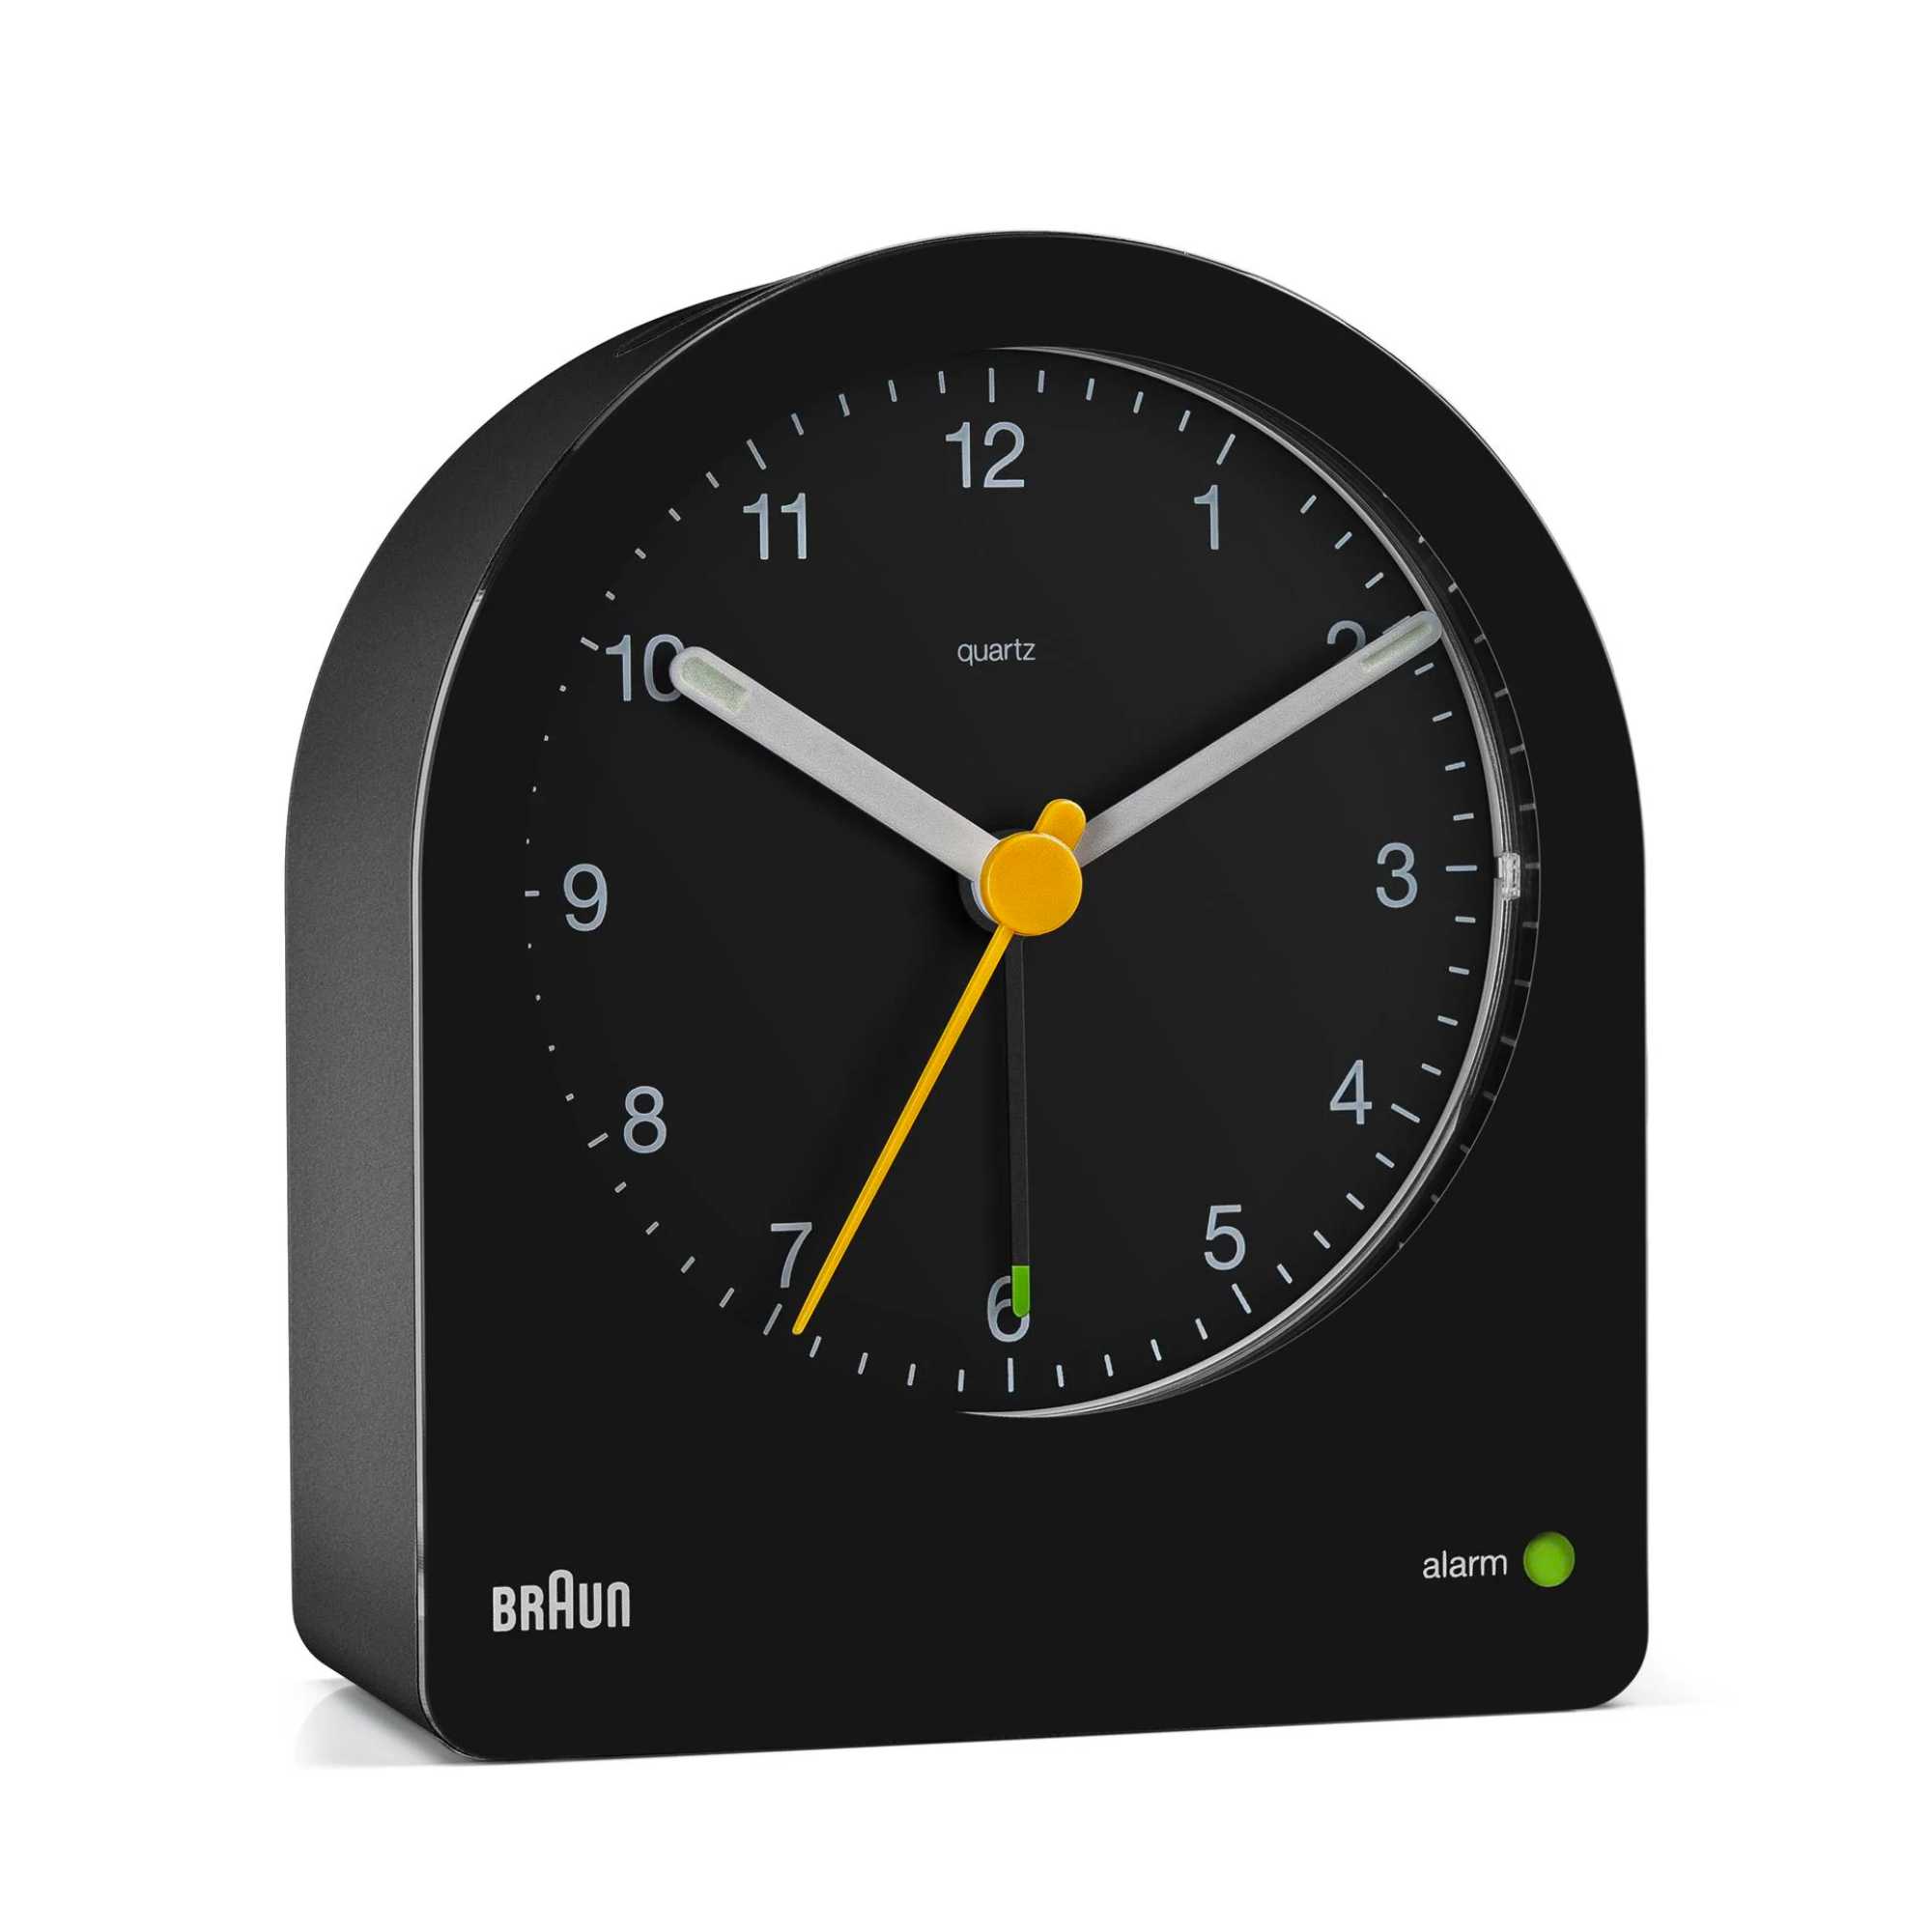 Braun BC22 Analogue Alarm Clock with Snooze and Continuous Backlight, Black